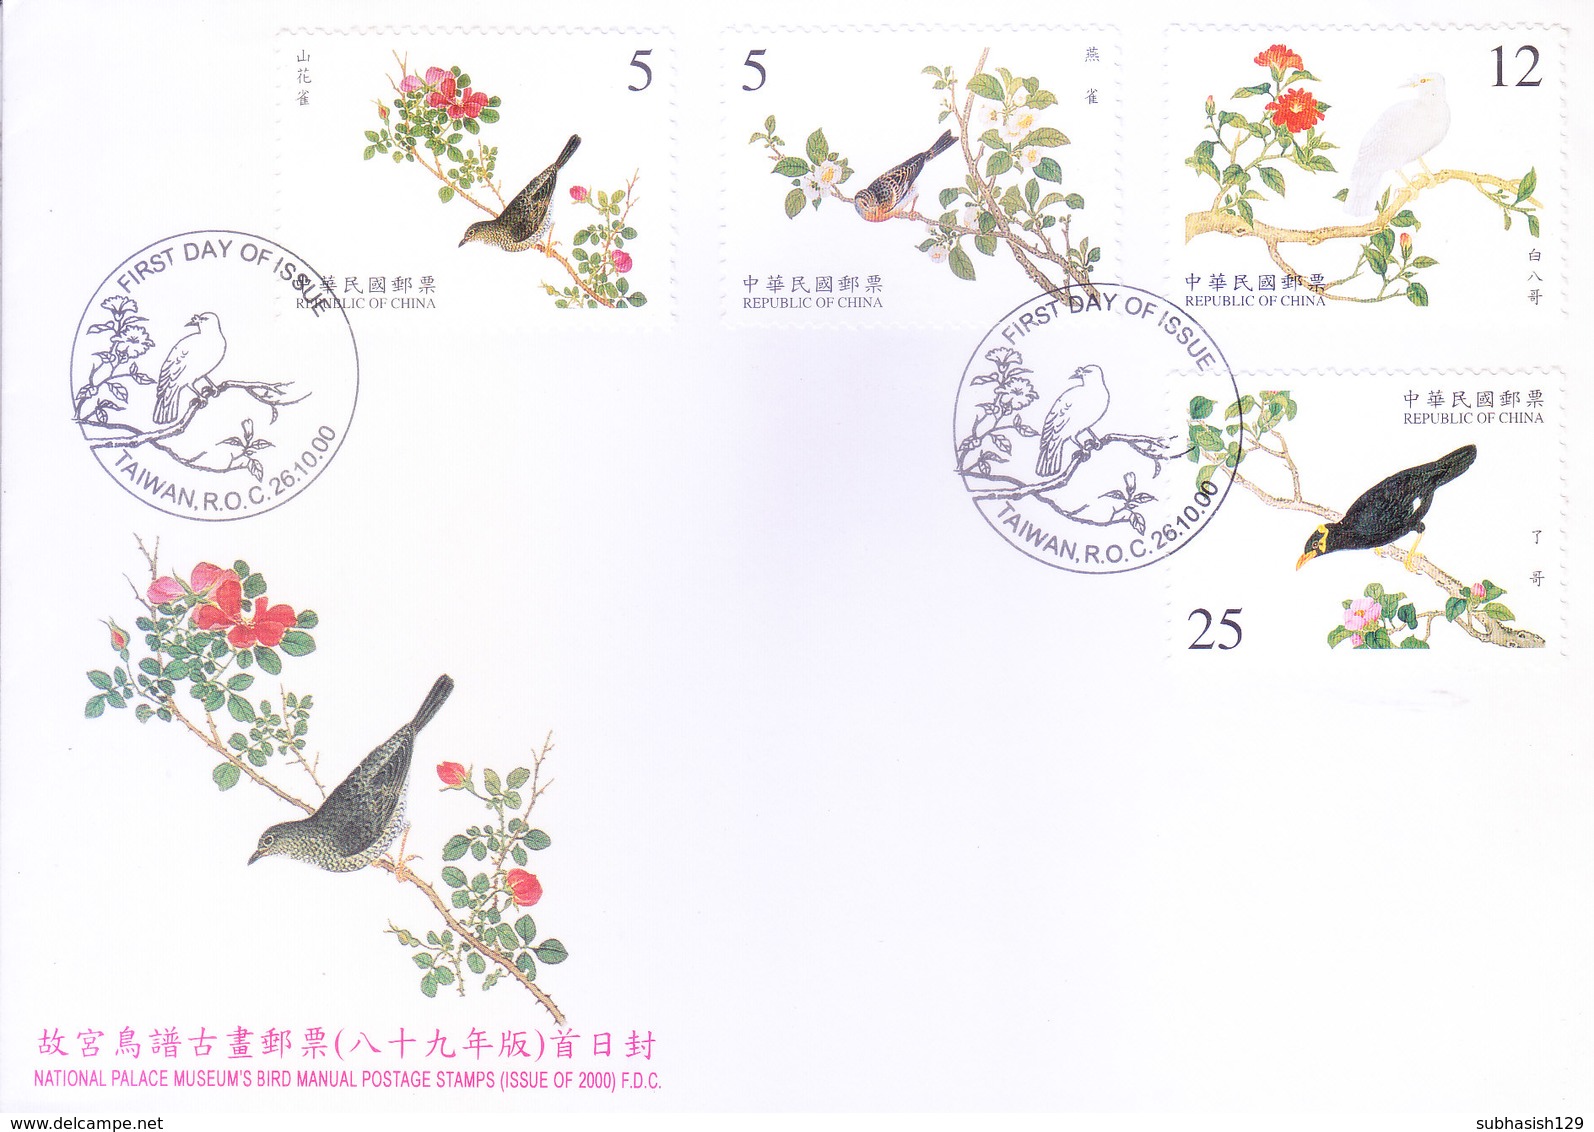 CHINA : 26-10-2000, FIRST DAY COVER : SET OF 4v :NATIONAL PALACE MUSEUM'S BIRD MANUAL - Covers & Documents